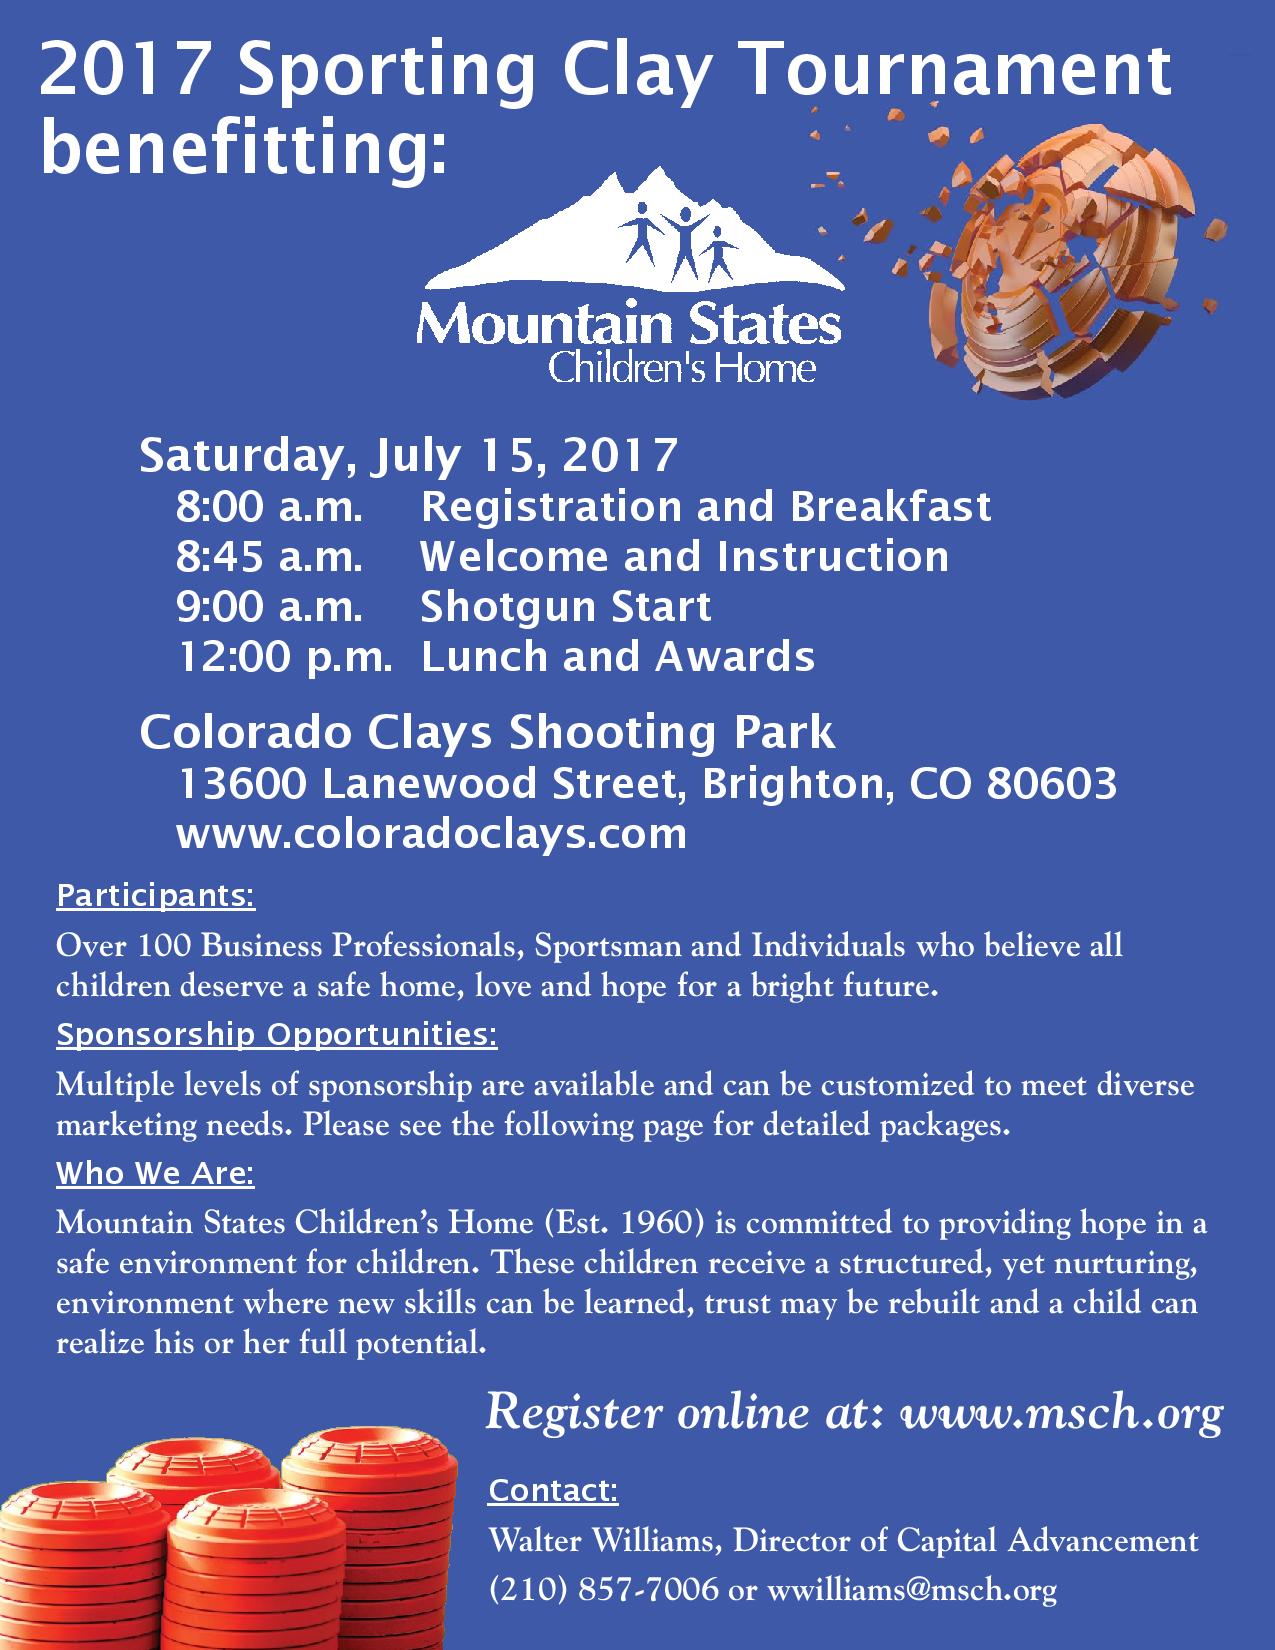 Mountain States Children's Home Sporting Clays Tournament